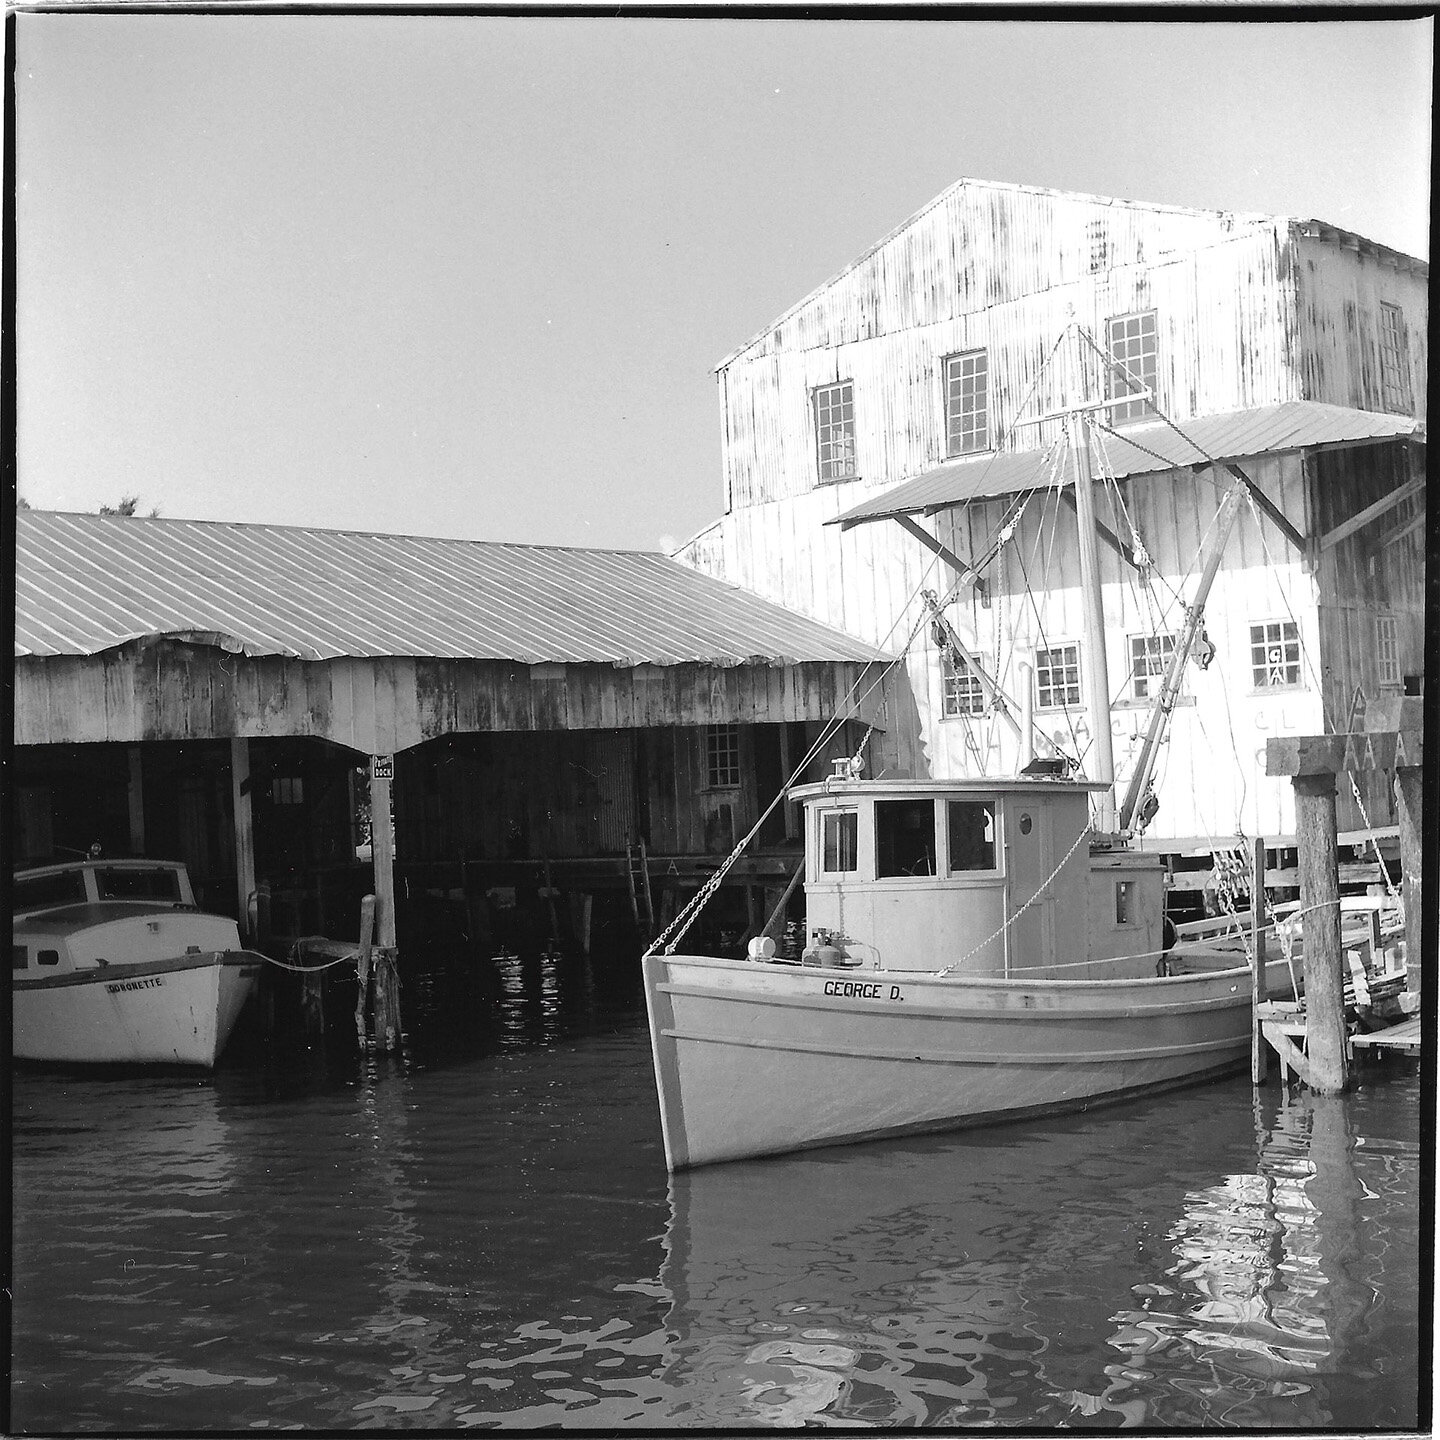   George D Shrimpboat, Apalachicola, FL  Image: 1982/printed: 2020 Gelatin silver print 9 1⁄4 x 9 1⁄4 in. (image size) The Do Good Fund, Inc., 2020-067 